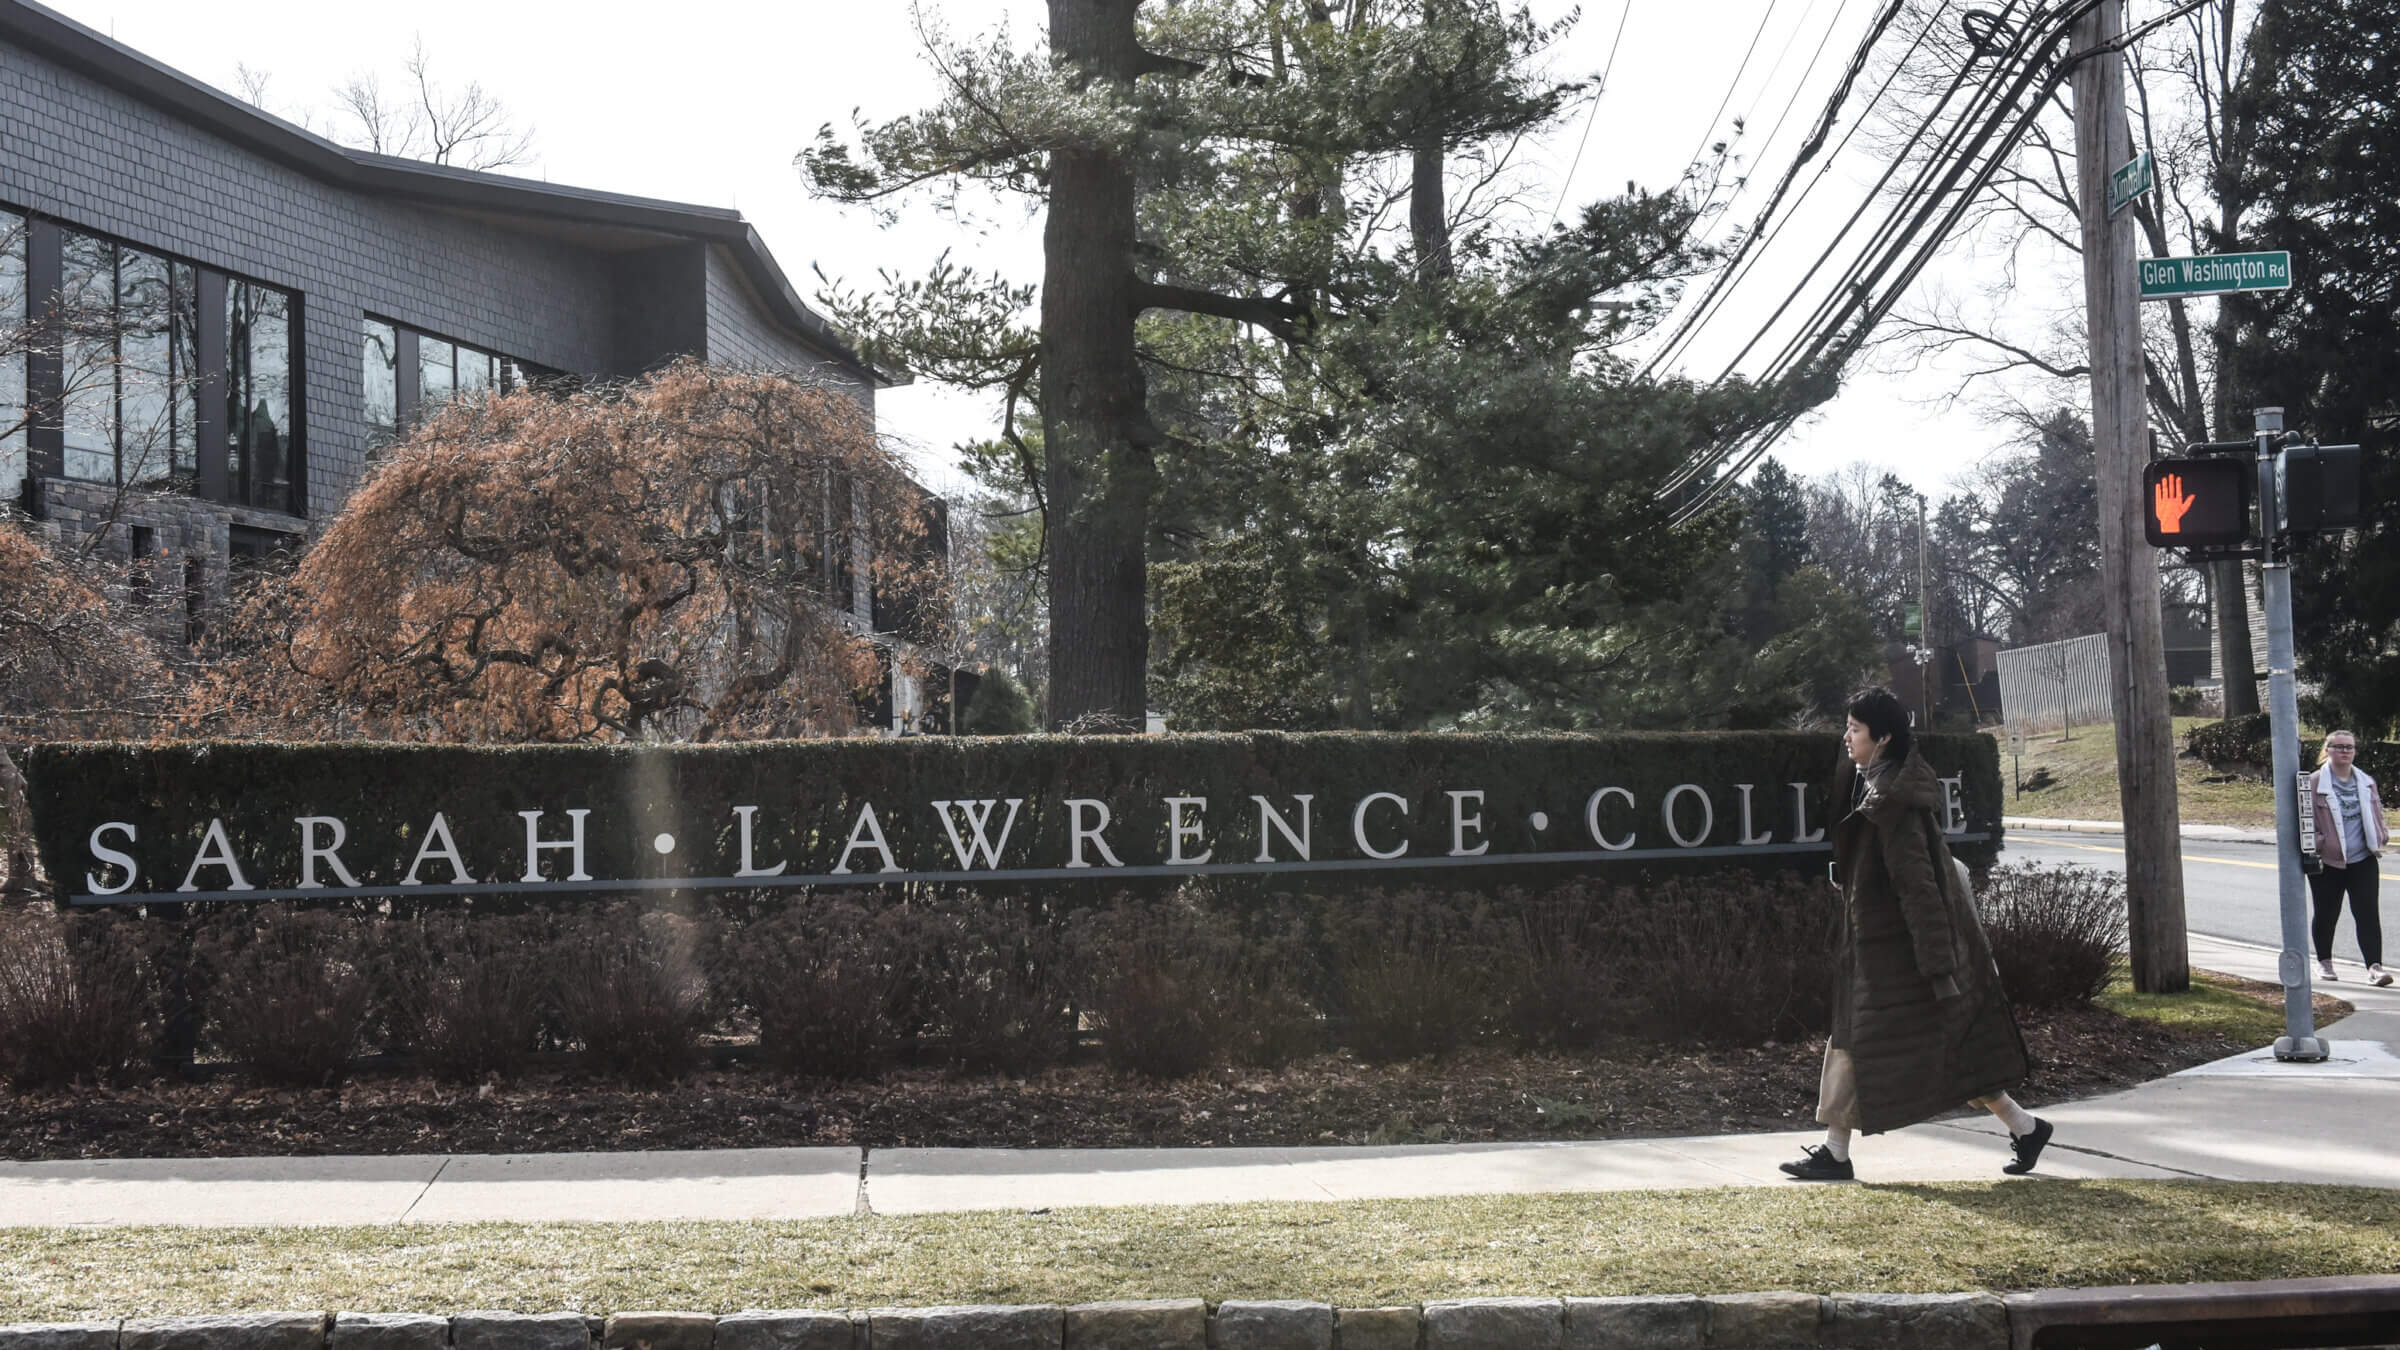 An exterior view of Sarah Lawrence College in Bronxville, New York.